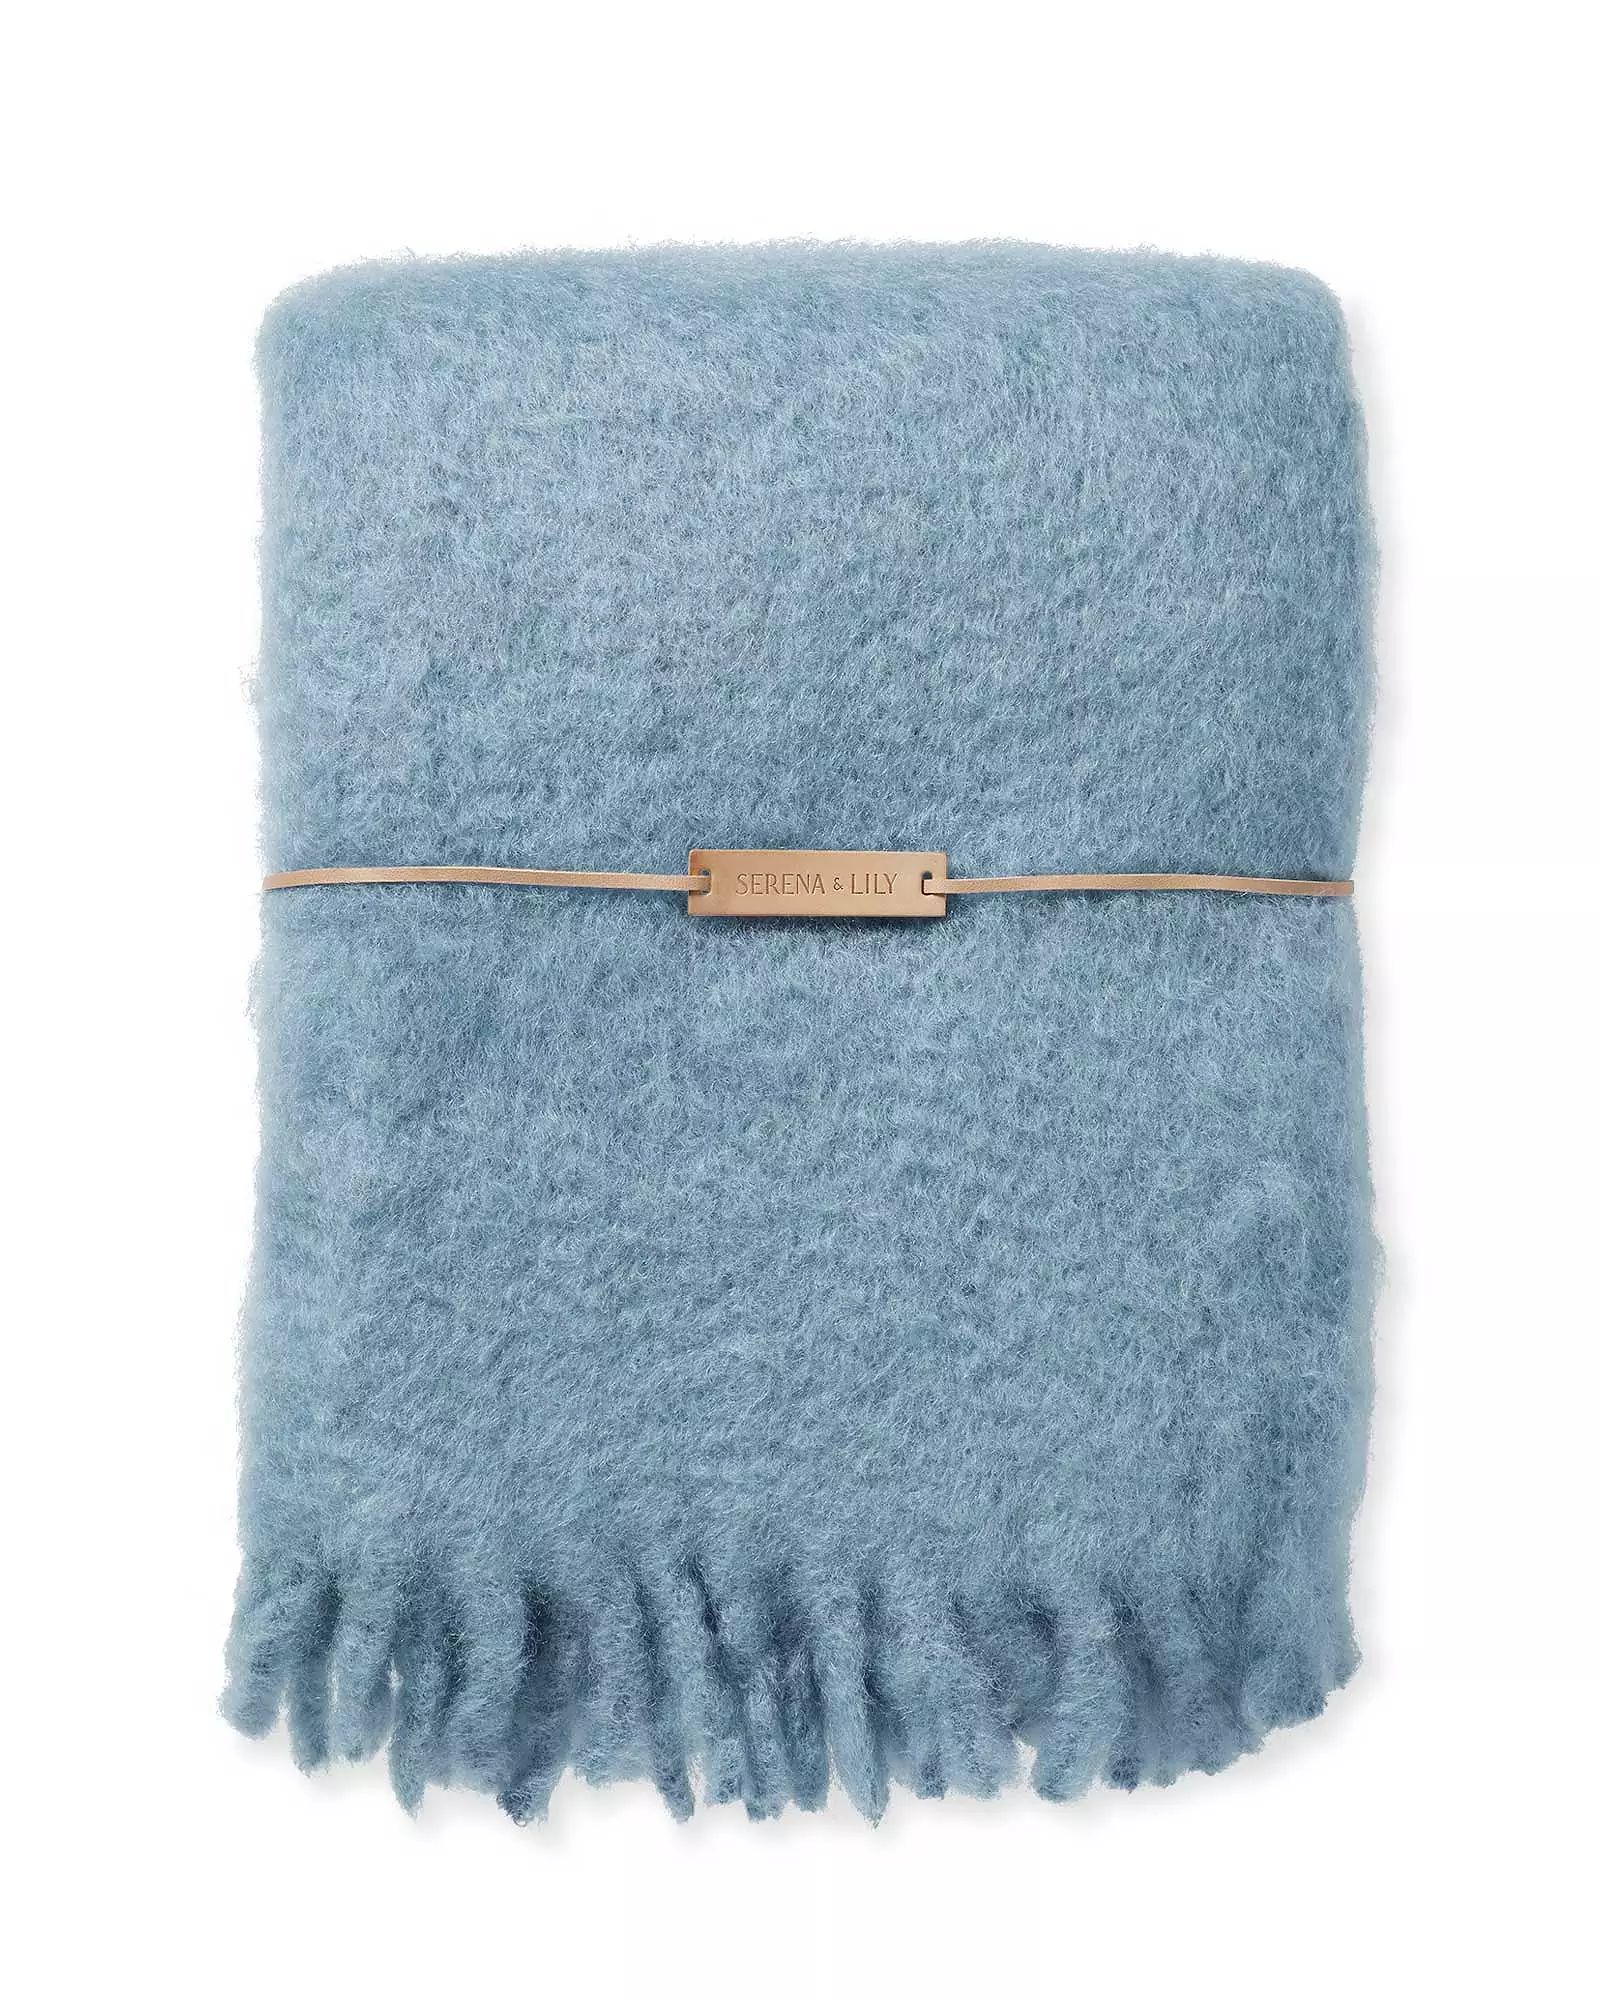 Albion Mohair Throw | Serena and Lily